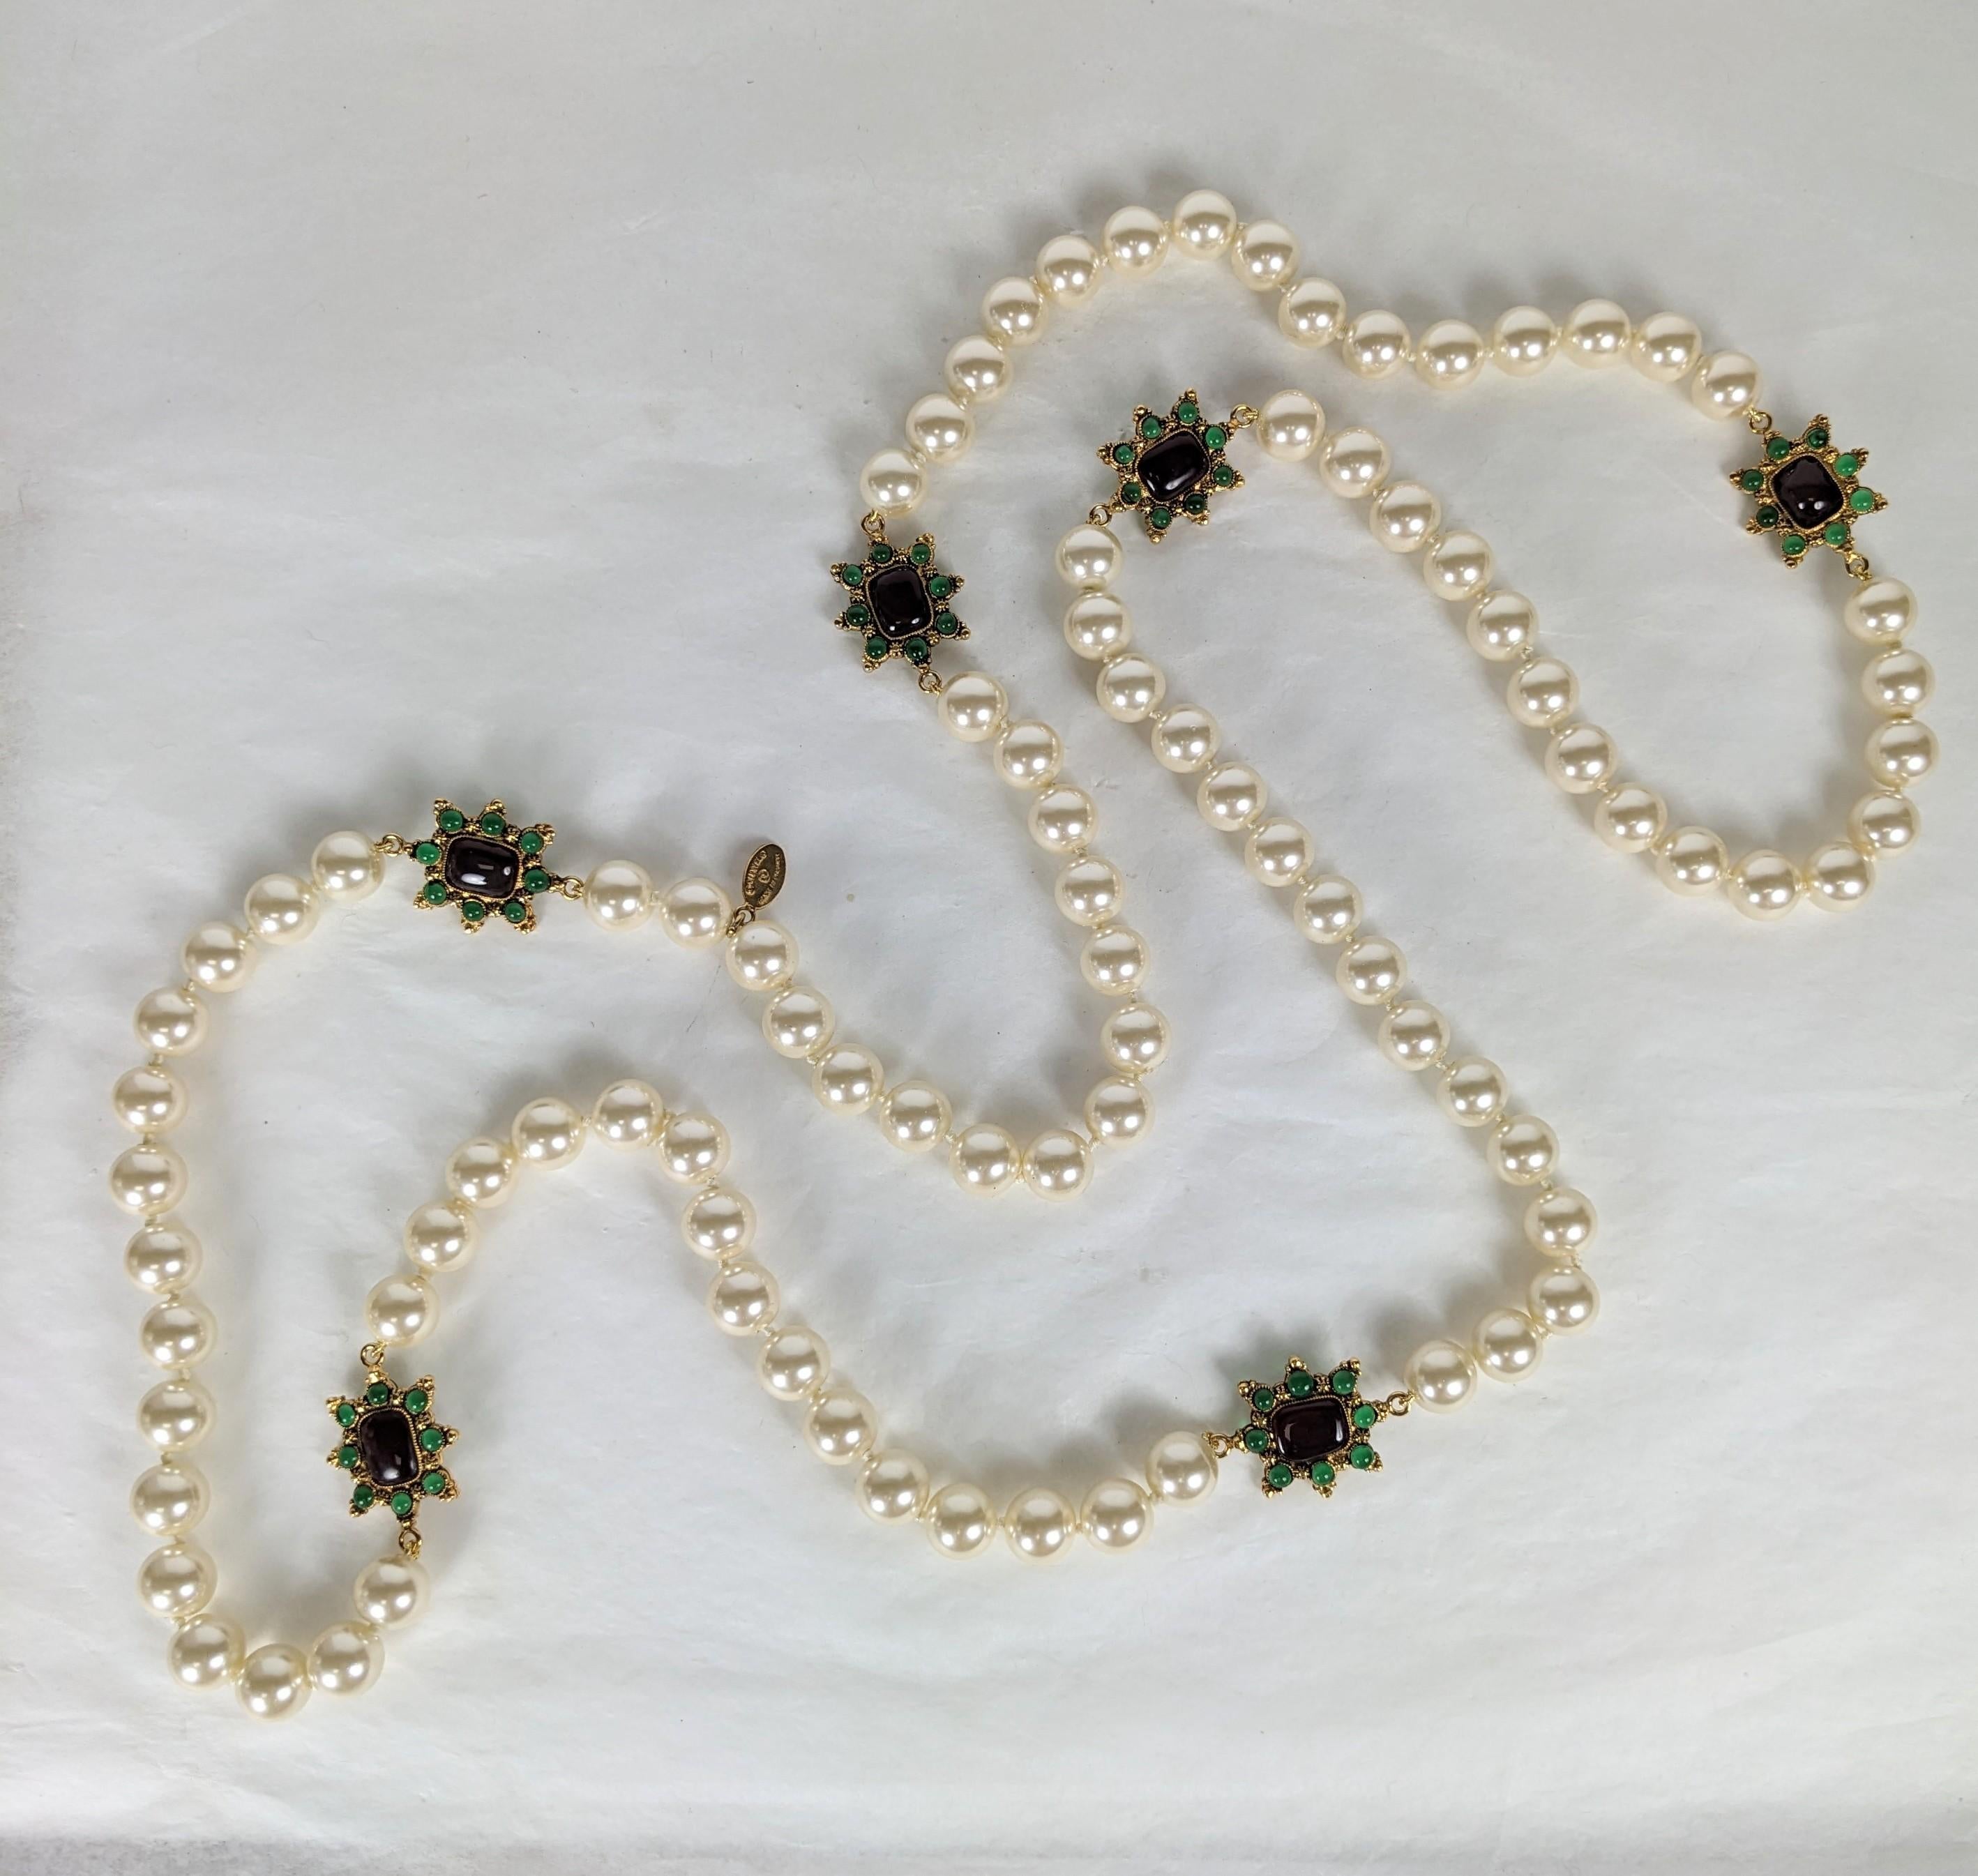 Chanel Maison Gripoix Renaissance Star Link Pearl Necklace In Excellent Condition For Sale In New York, NY